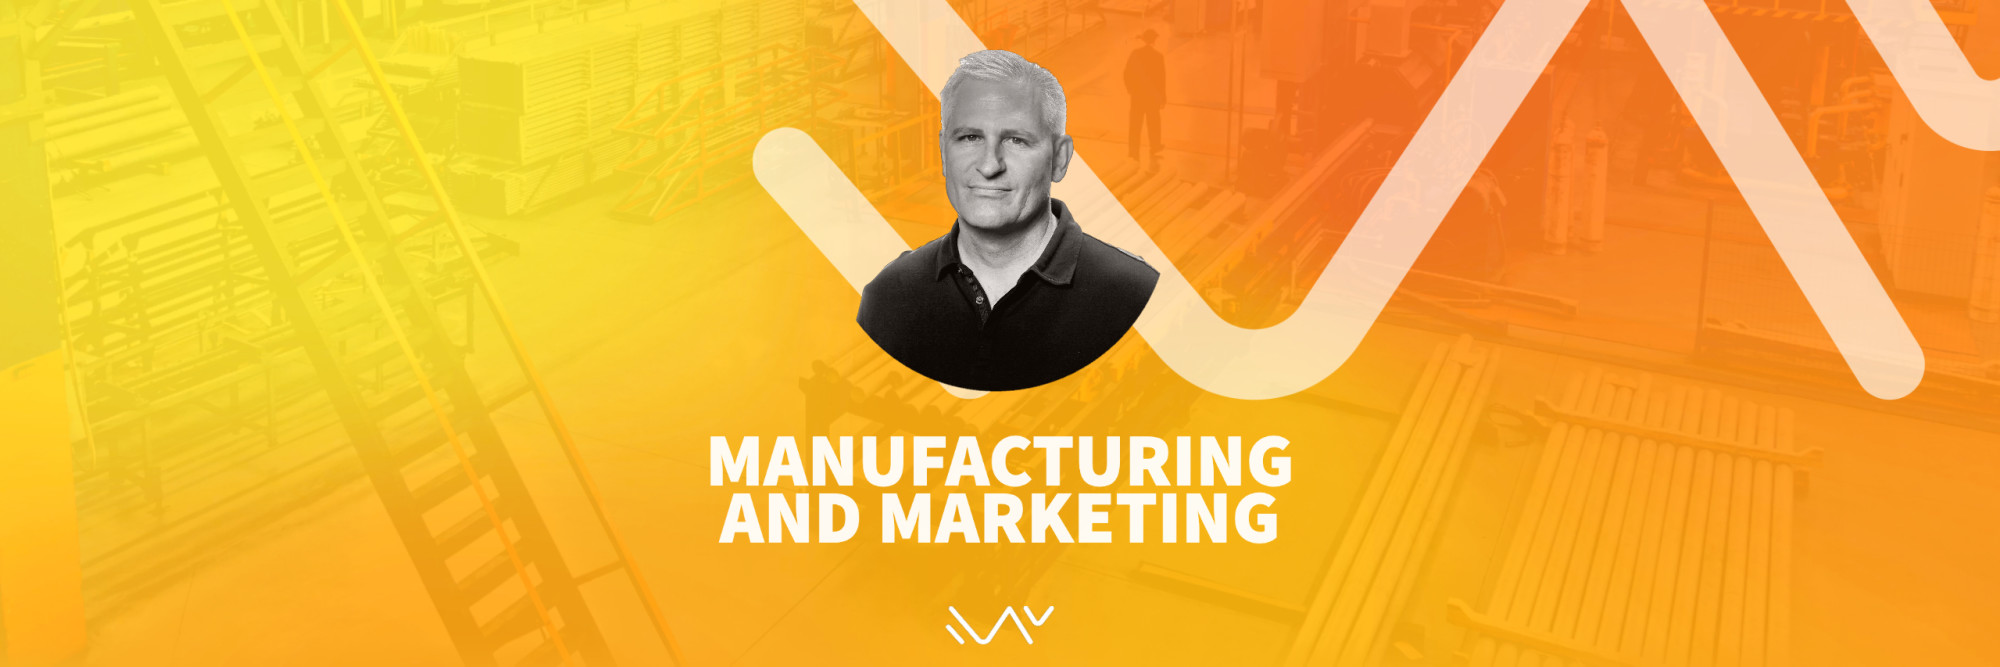 Manufacturing and Marketing